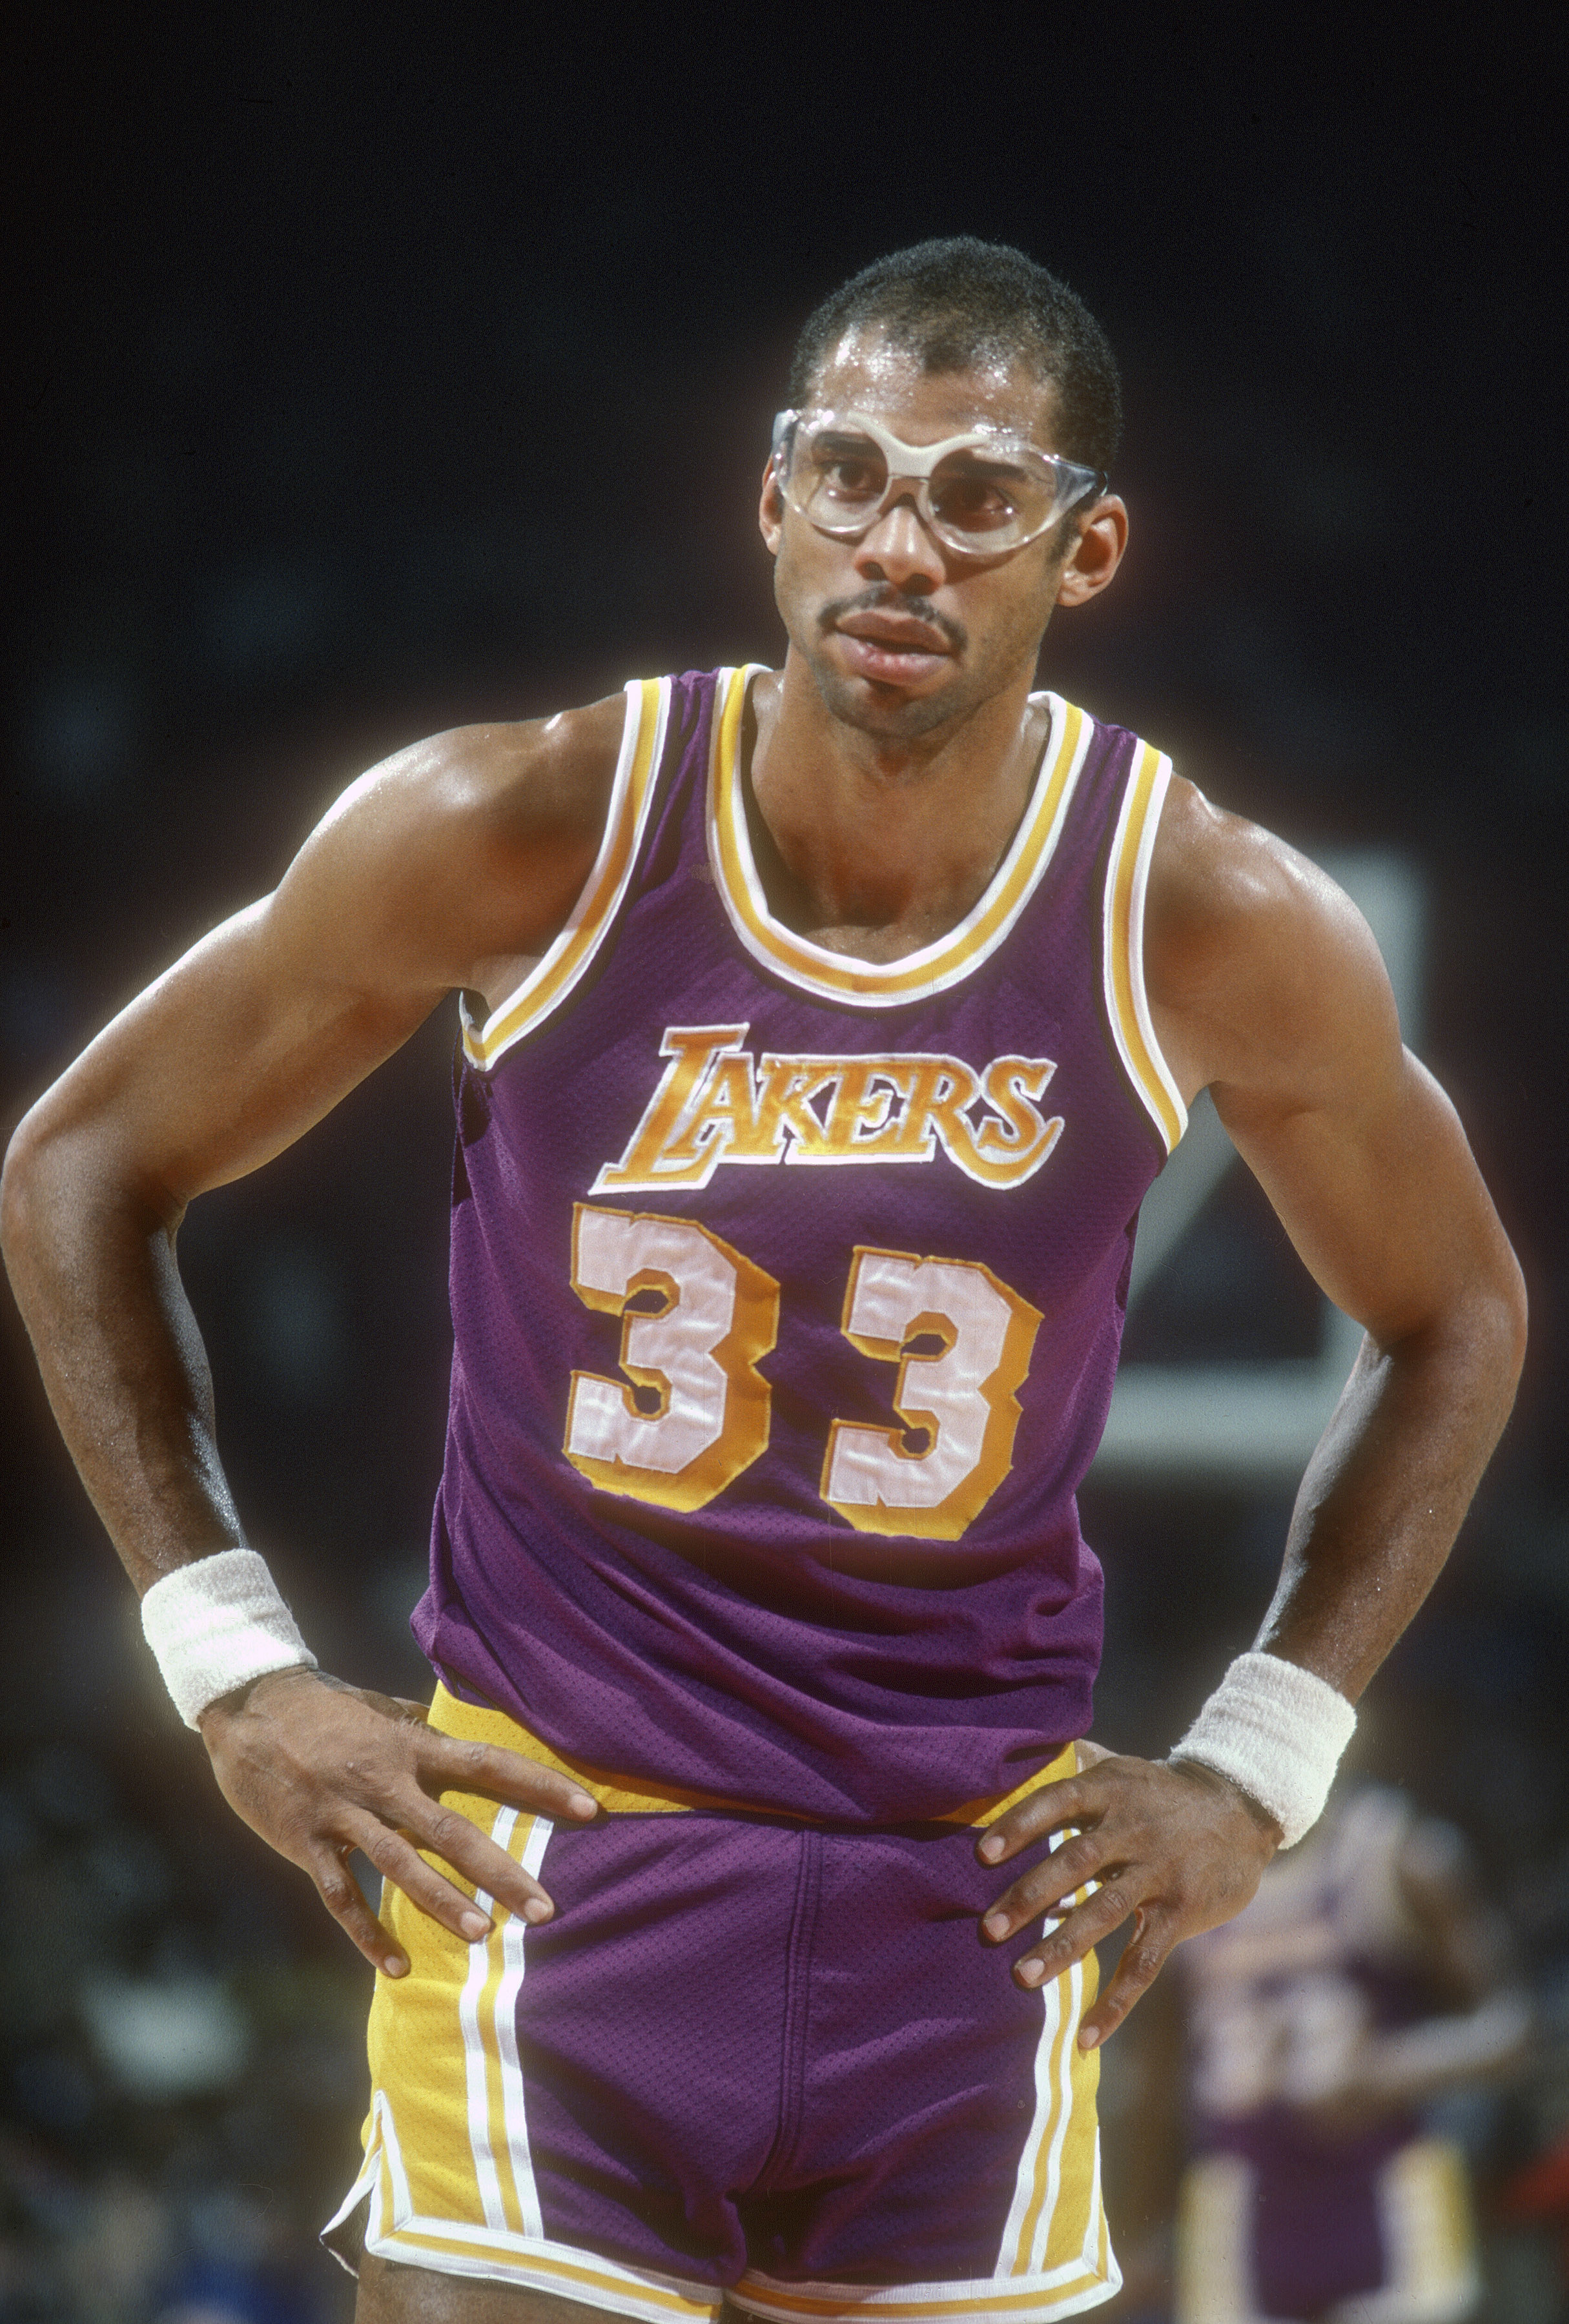 Kareem Abdul-Jabbar stands on the court in a Lakers uniform